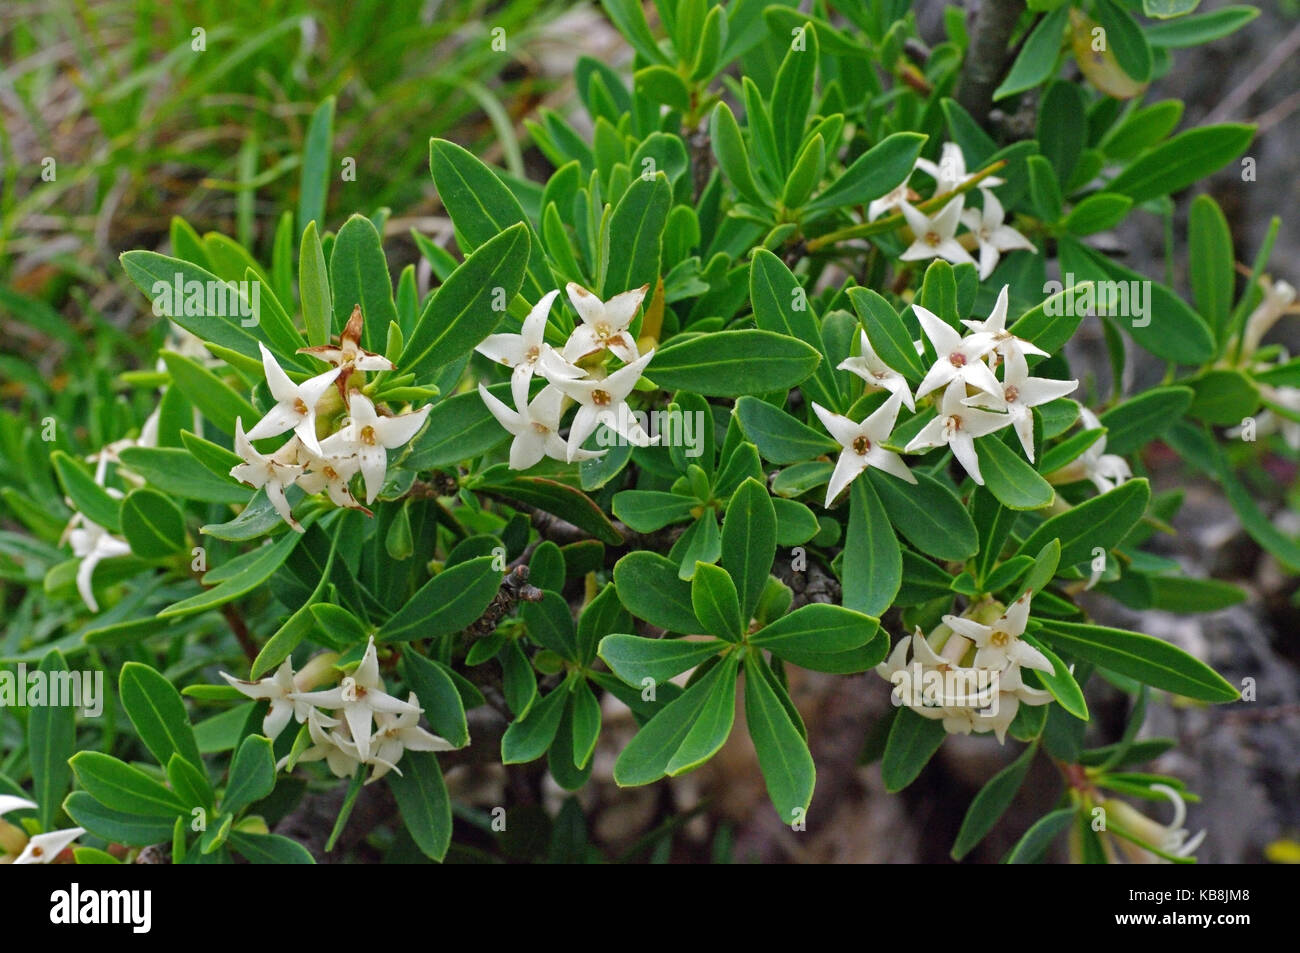 this is the wildflower Daphne oleoides, the Olive-leaved daphne or Olive Daphne, from the family Thymelaeaceae Stock Photo